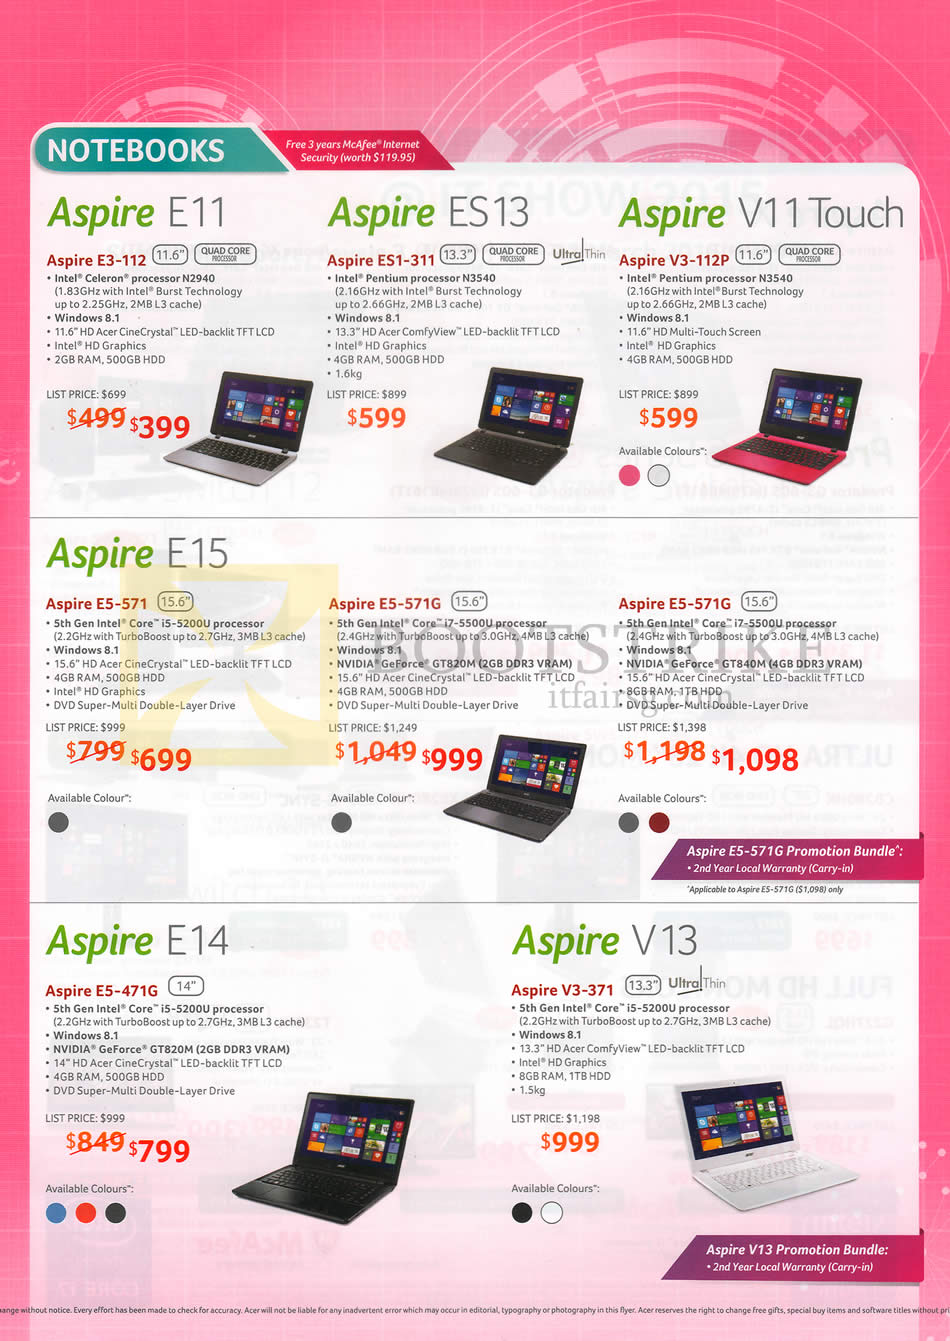 IT SHOW 2015 price list image brochure of Acer Notebooks Aspire E11 ES13 V11 Touch E15 E14 V13 E3-112, ES1-311, V3-112P, E5-571, 571G, 471G, V3-371